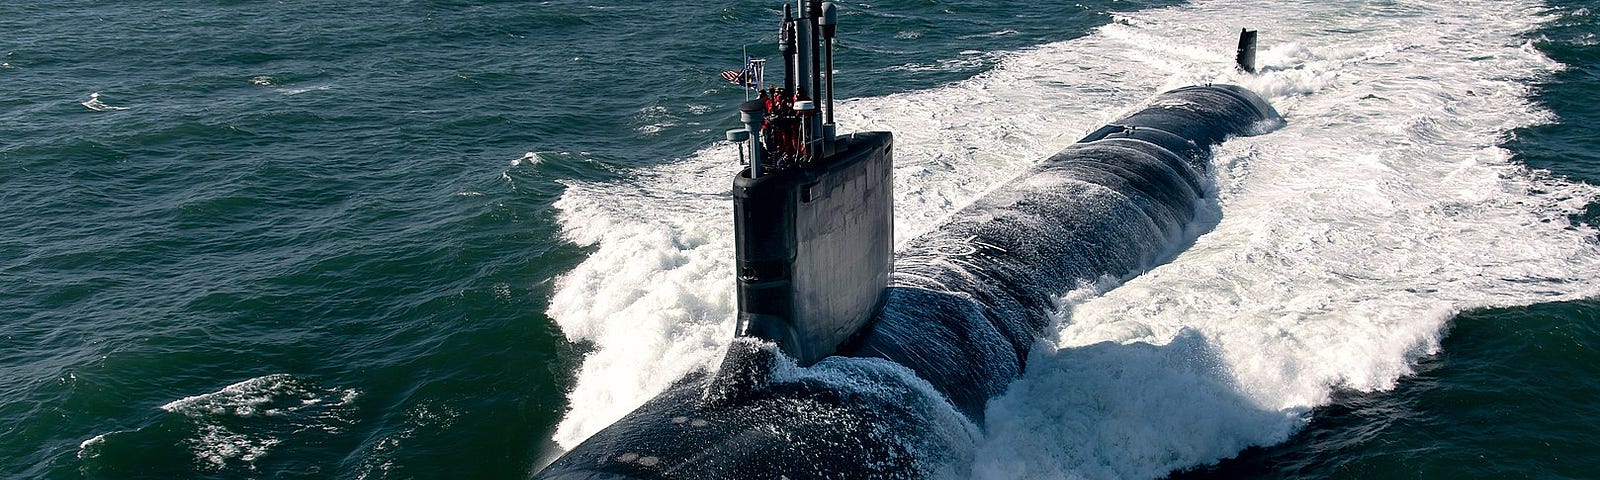 Submarines: US to Install Caterpillar Drive on Submarine It’s 40 years since Tom Clancy wrote ‘The Hunt for Red October’, and now his vision is about to become a reality